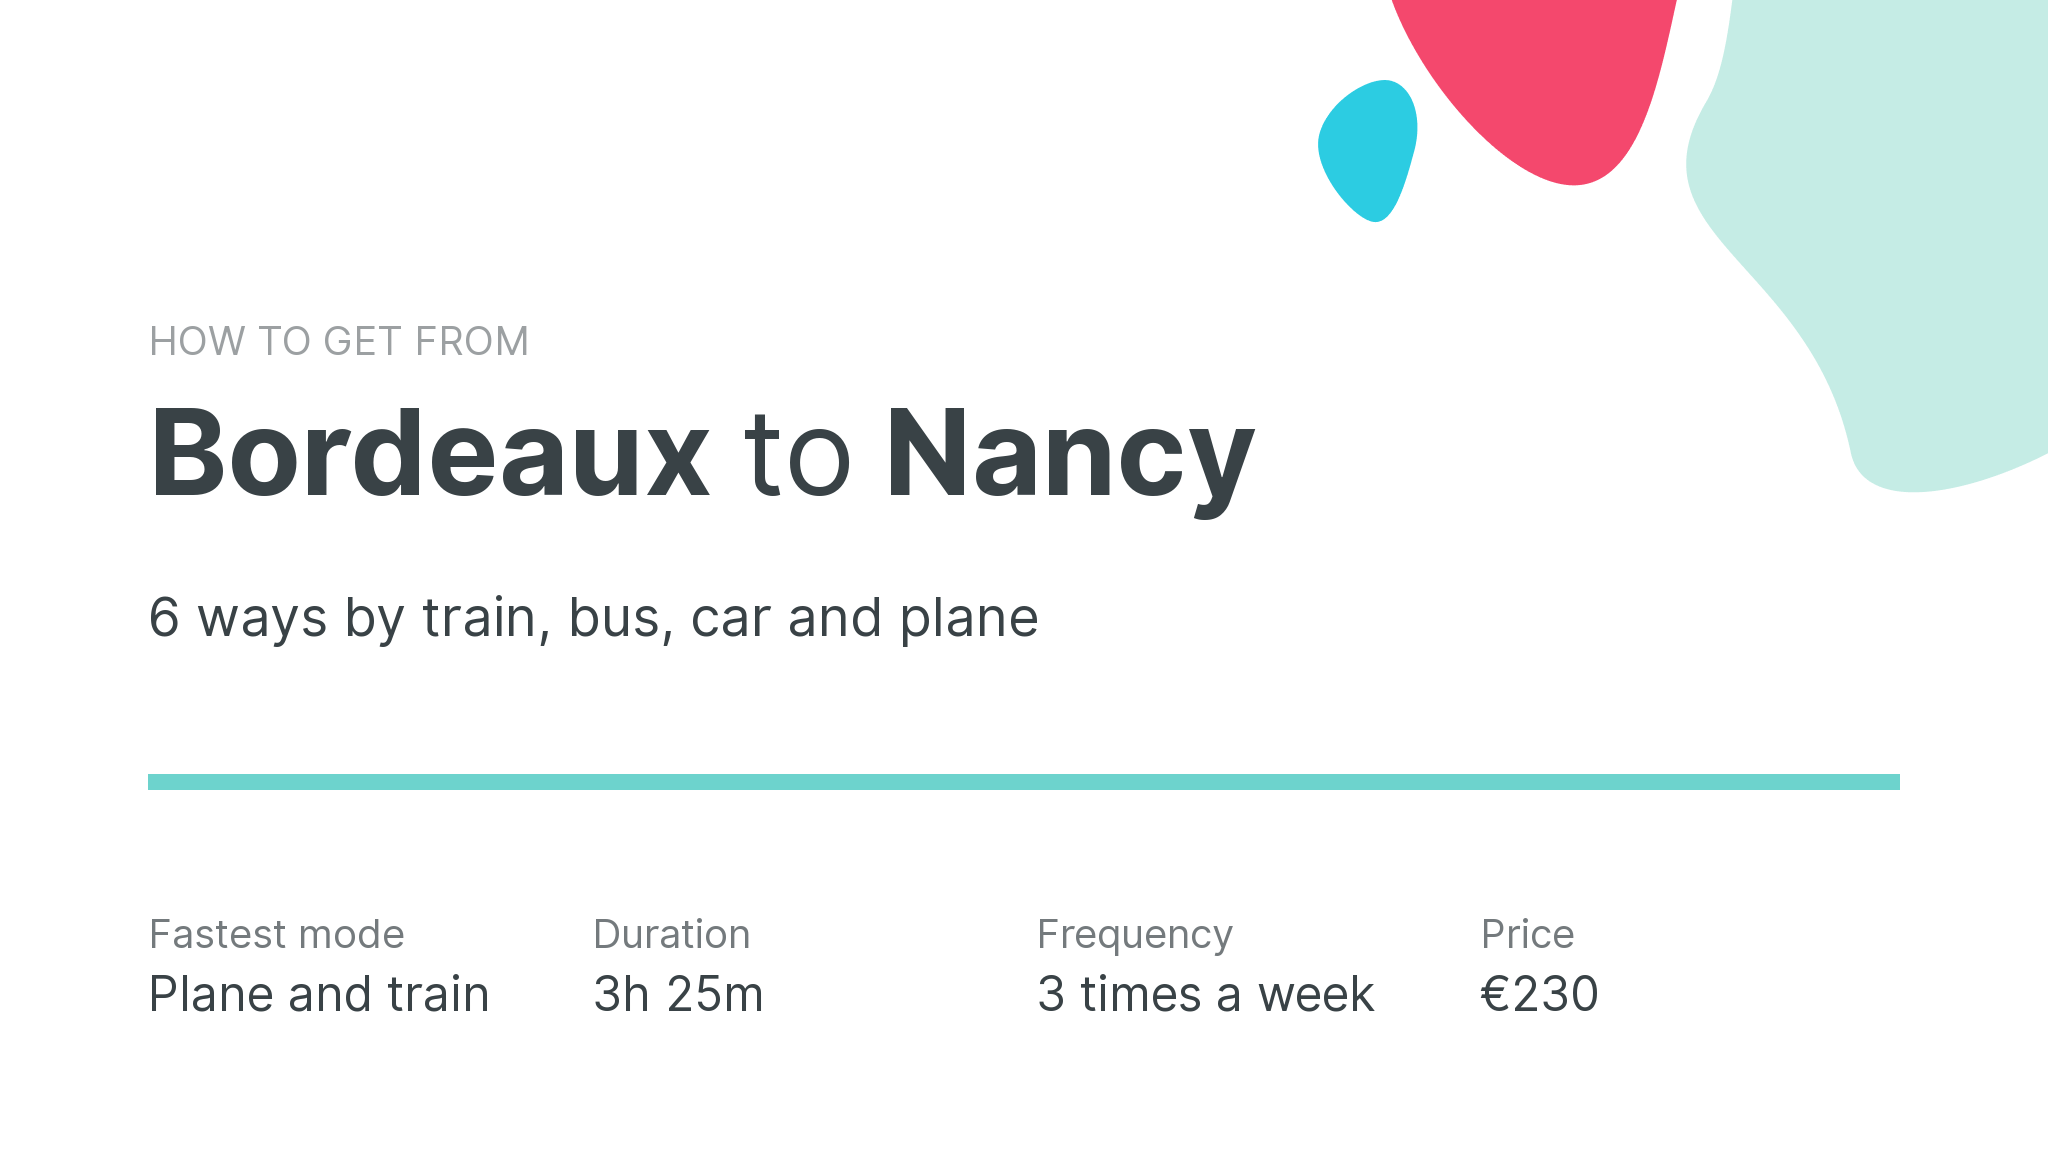 How do I get from Bordeaux to Nancy